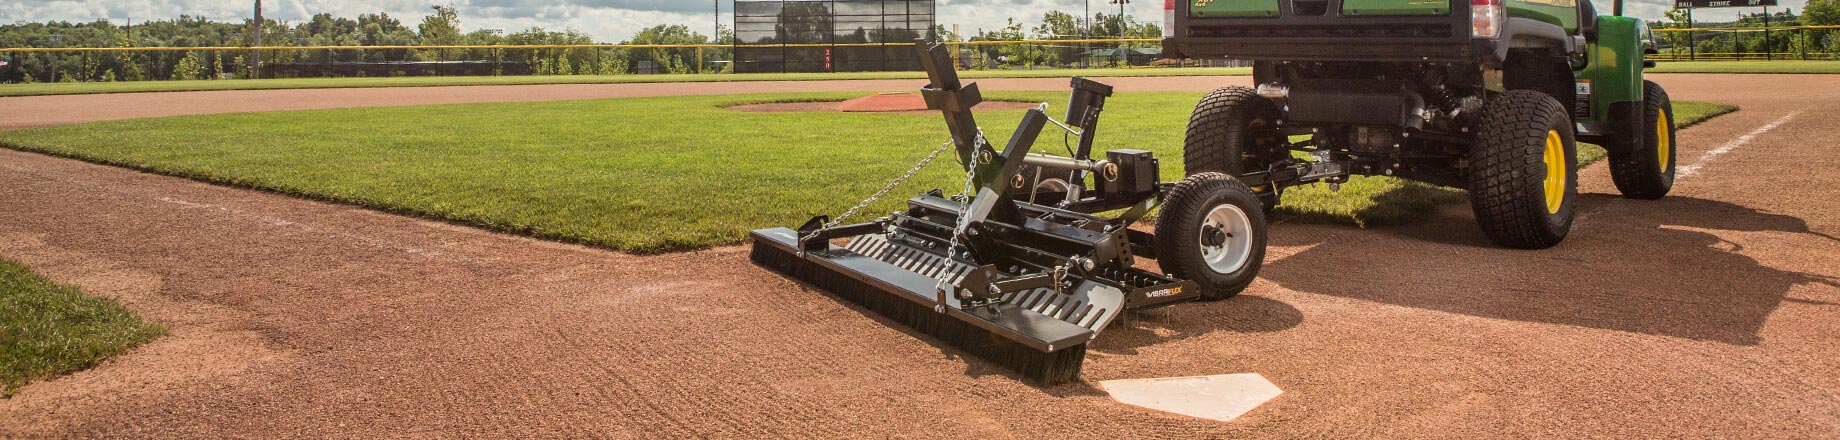 ABI Attachments - Infield Groomers